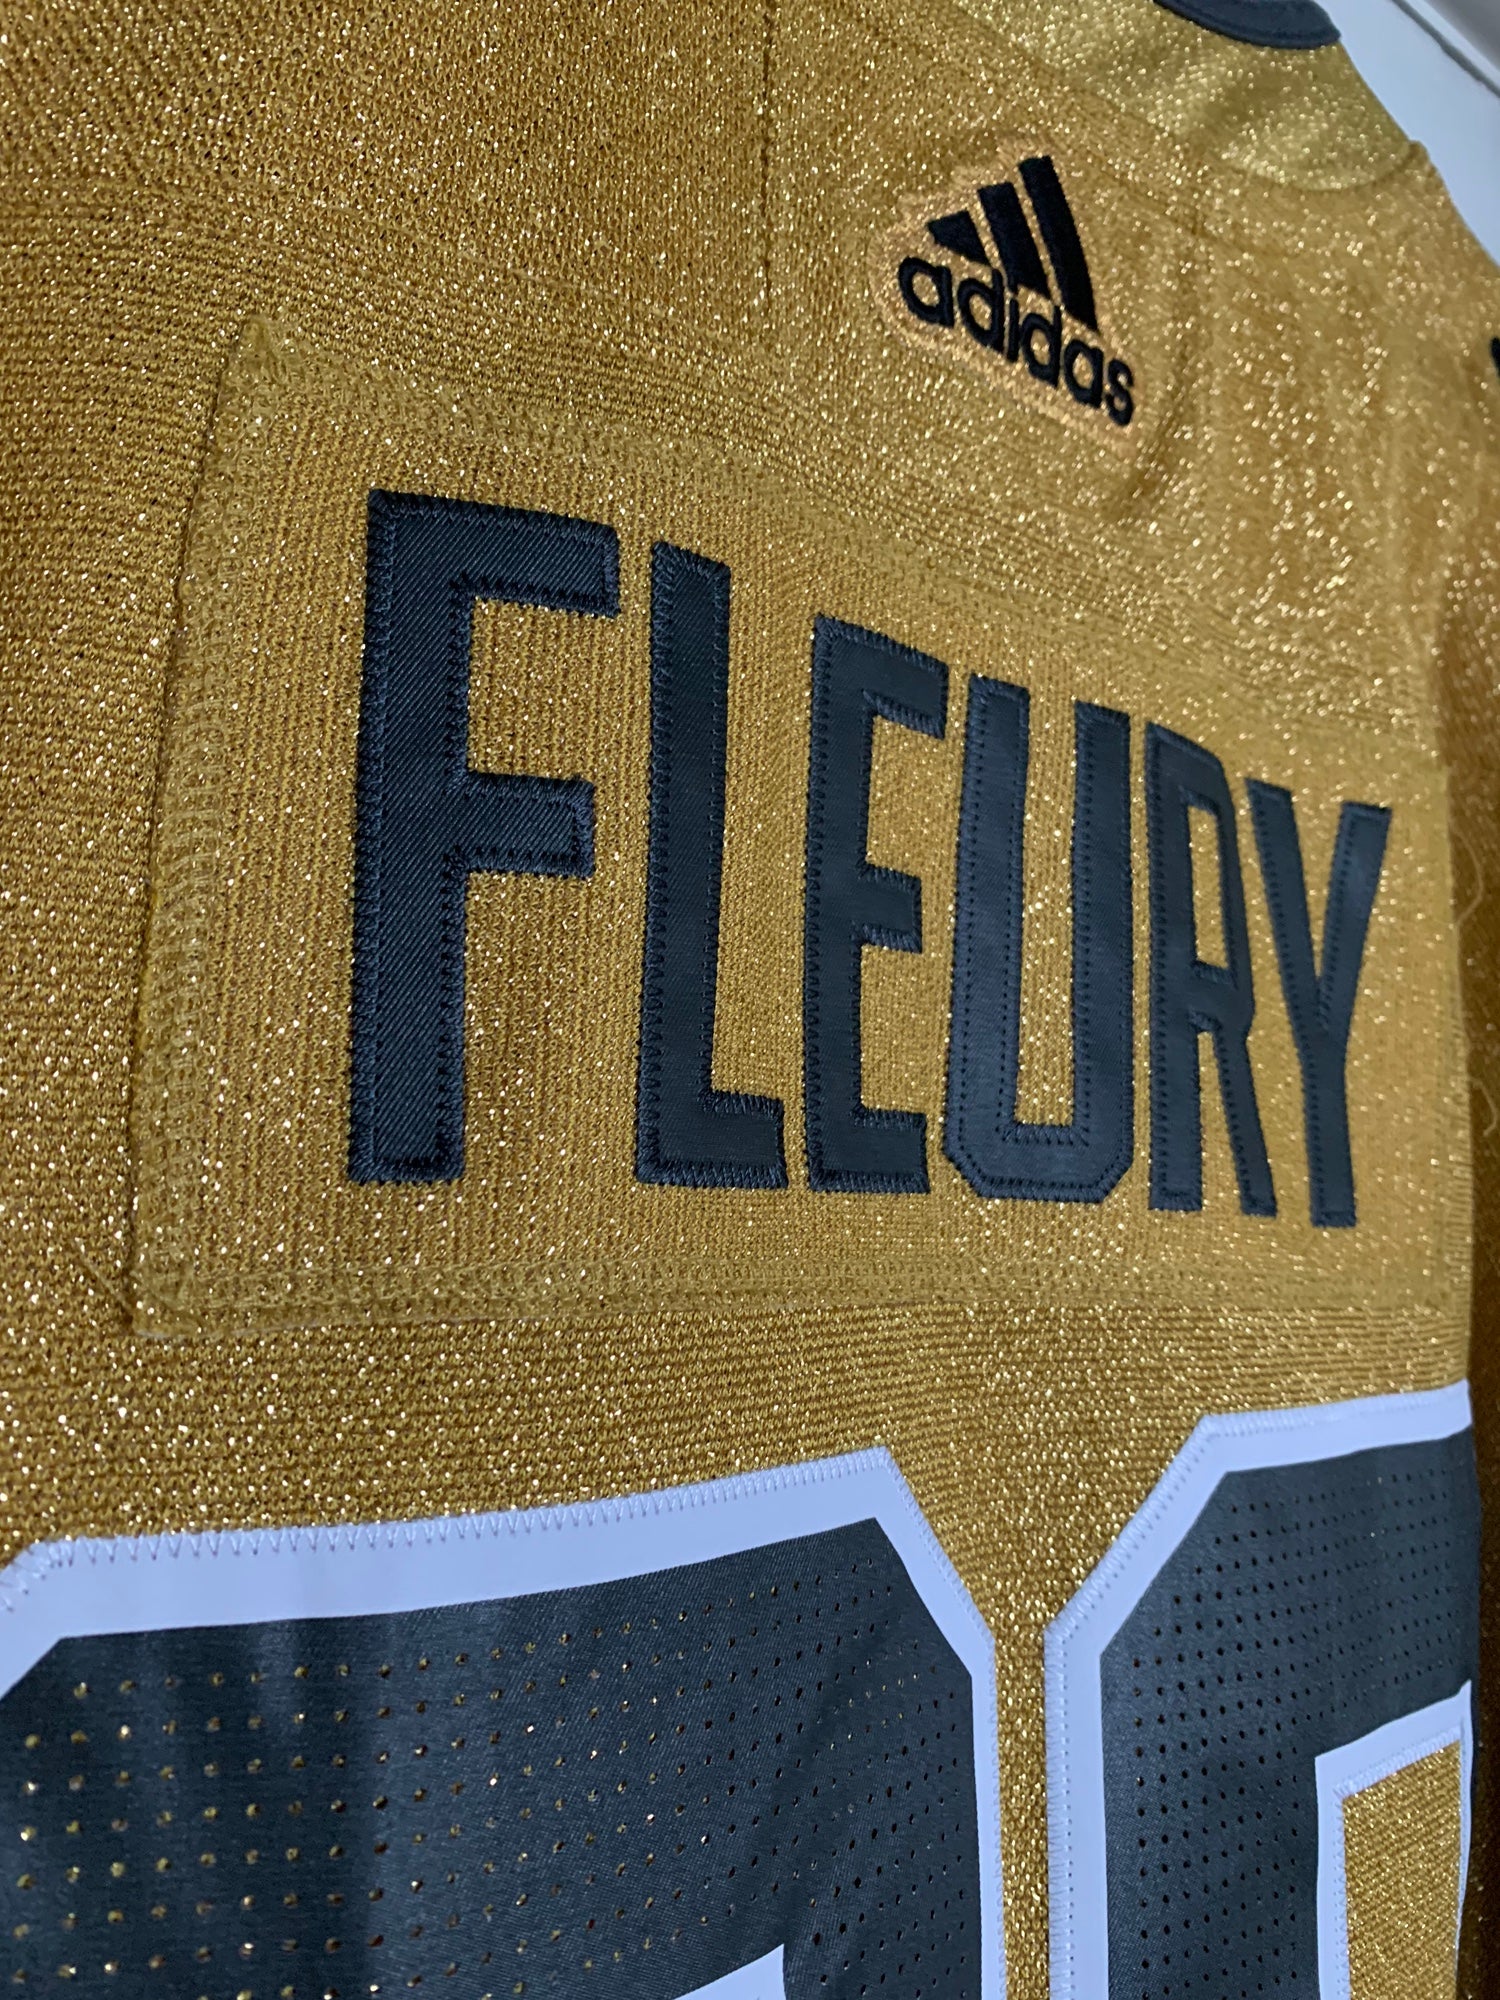 Marc-Andre Fleury Vegas Golden Knights Adidas Authentic Home NHL Hocke –